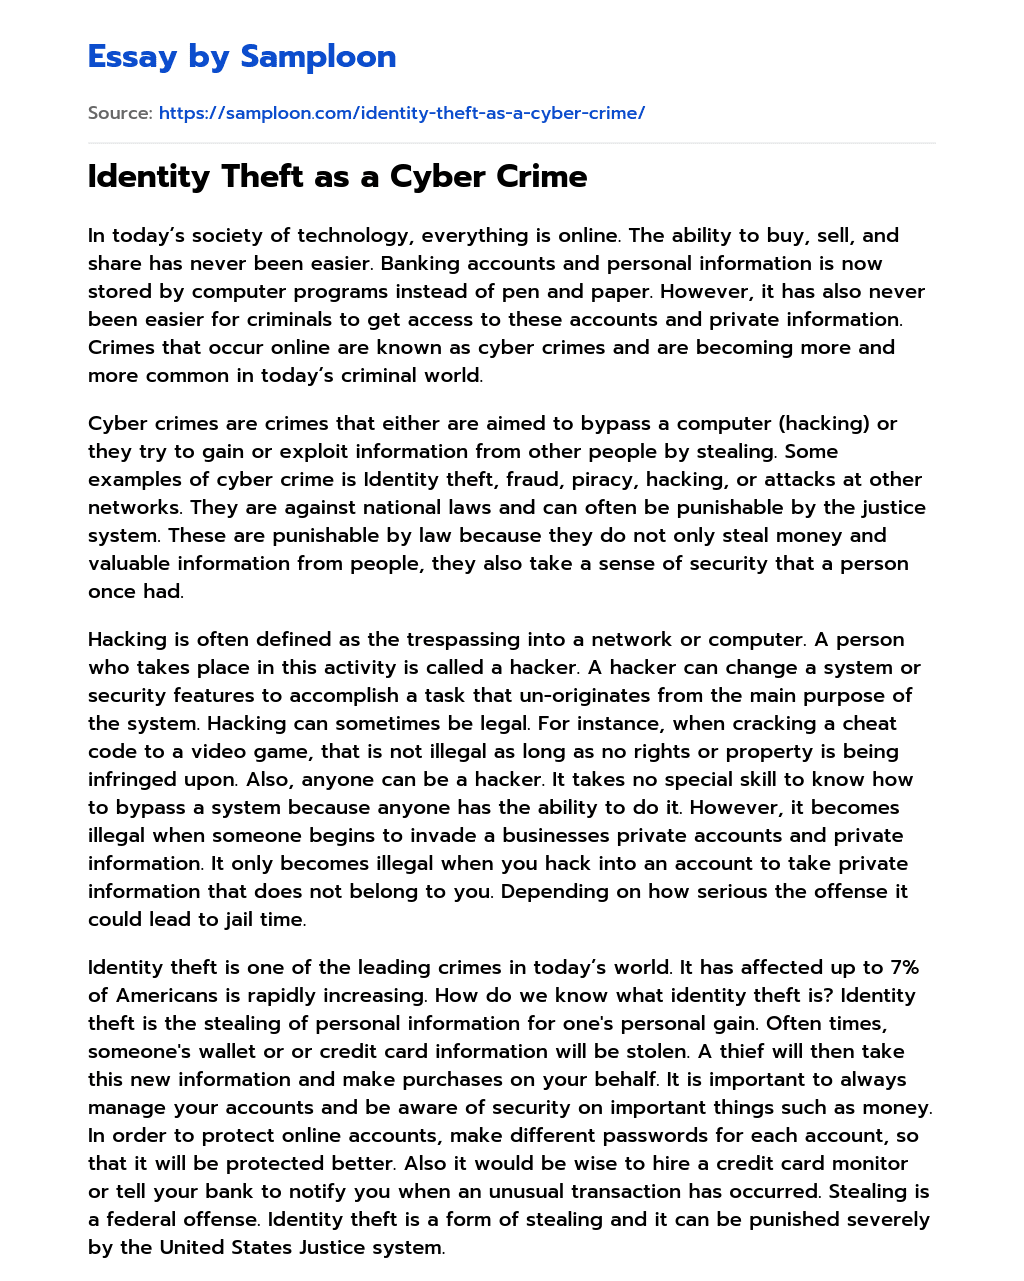 Identity Theft as a Cyber Crime essay